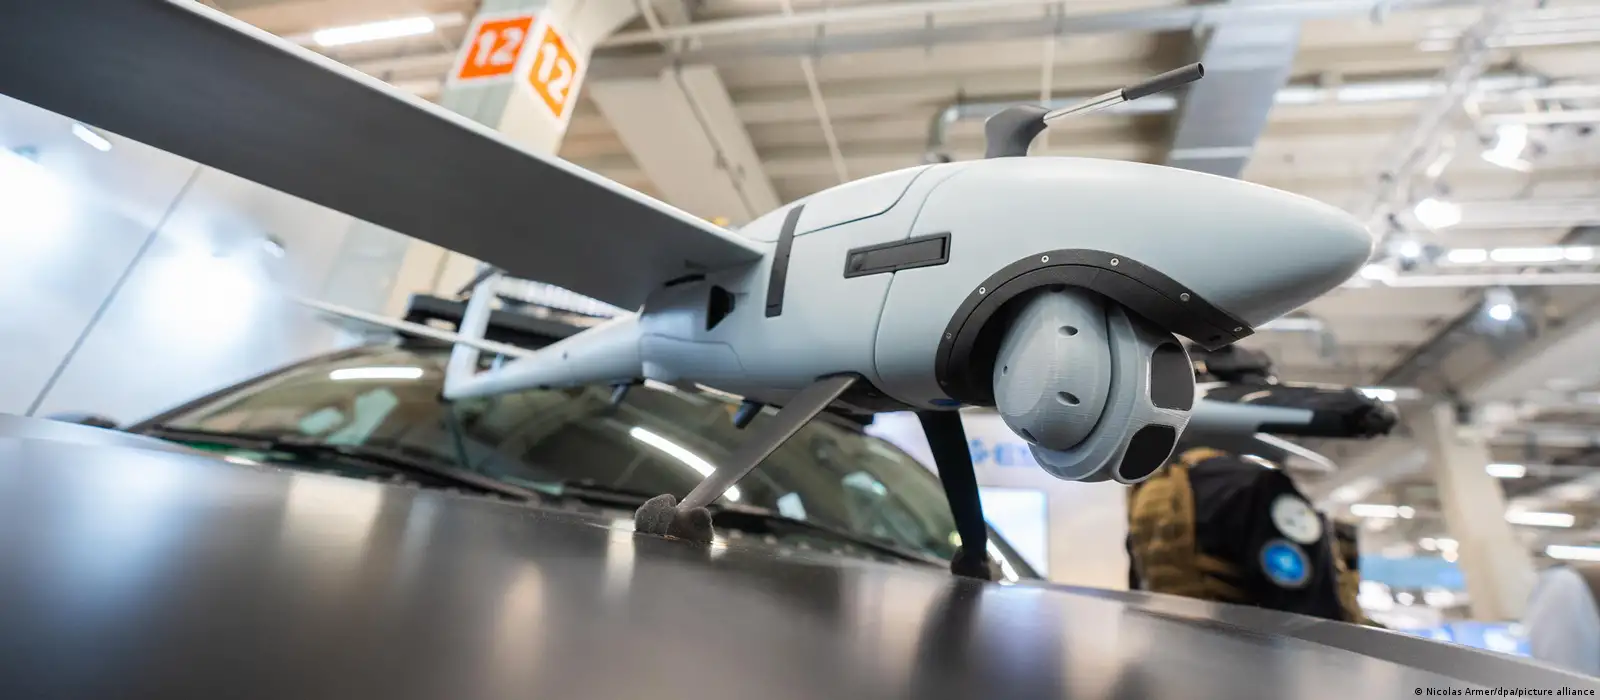 Drones for Ukraine, made in Germany – DW – 02/01/2023